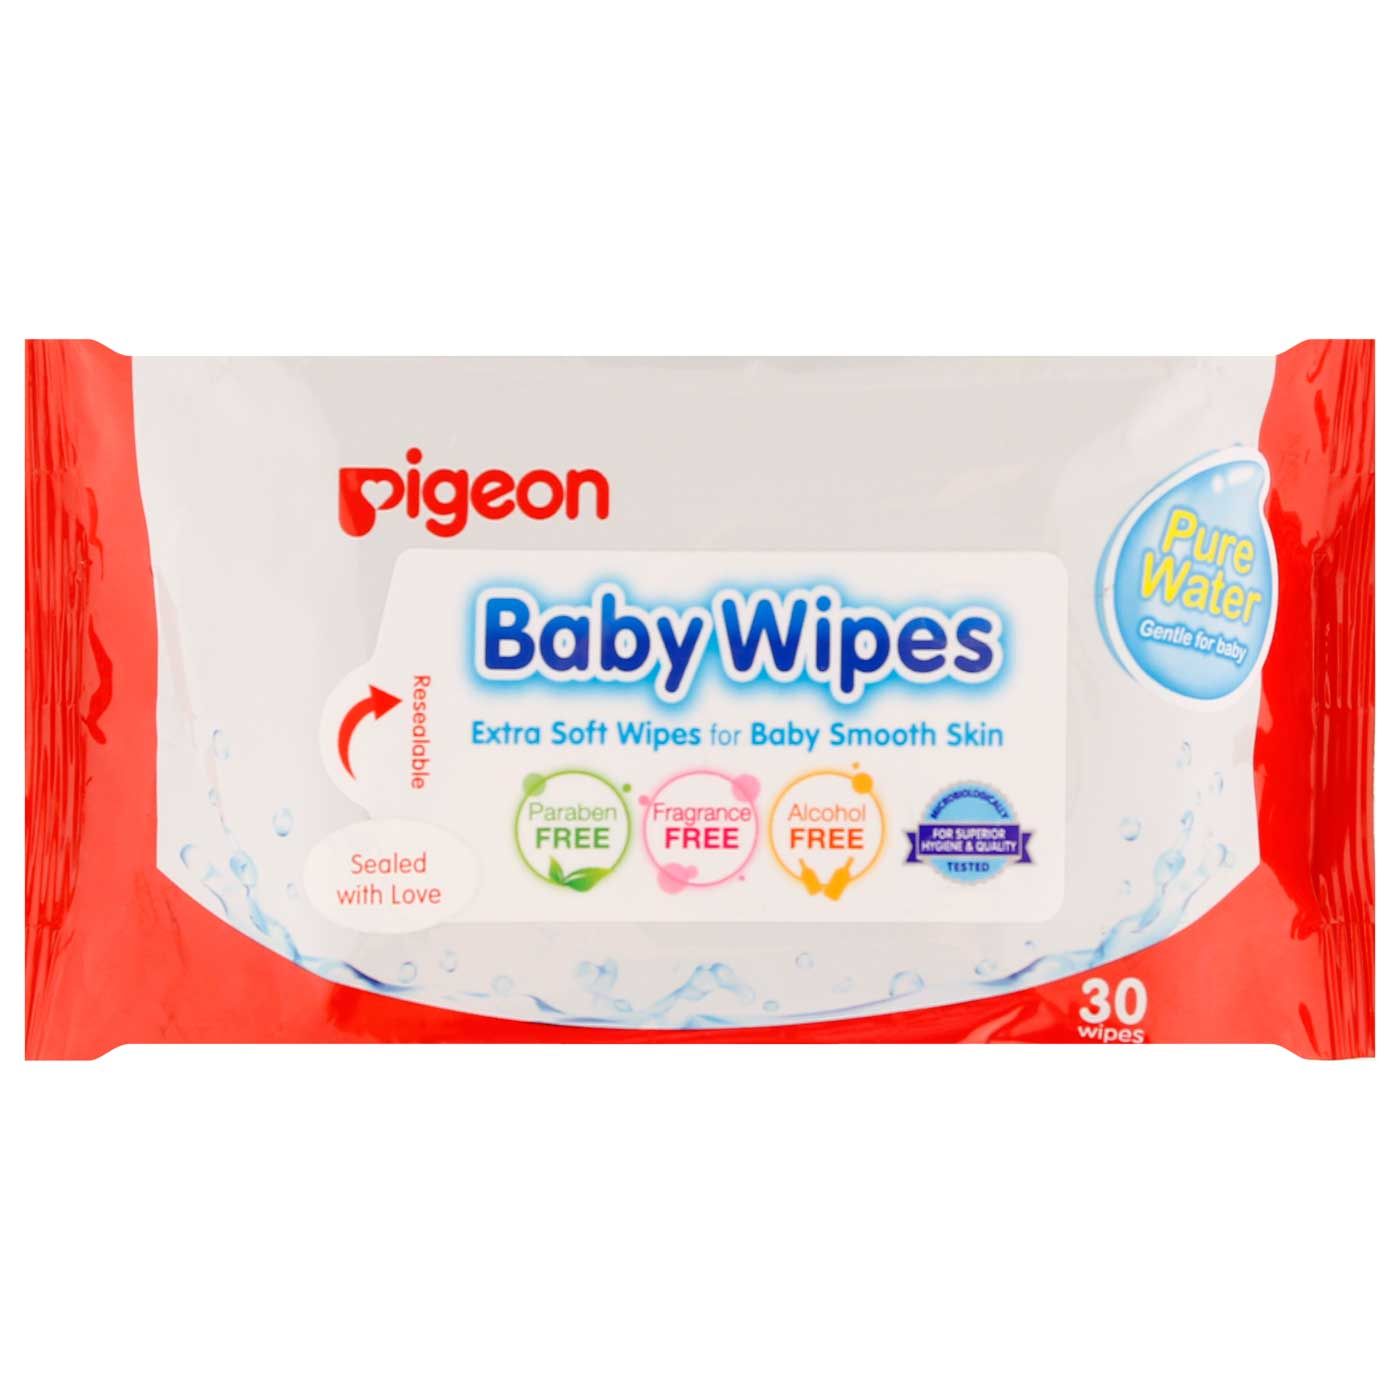 Pigeon Baby Wipes Pure Water 30's - 1